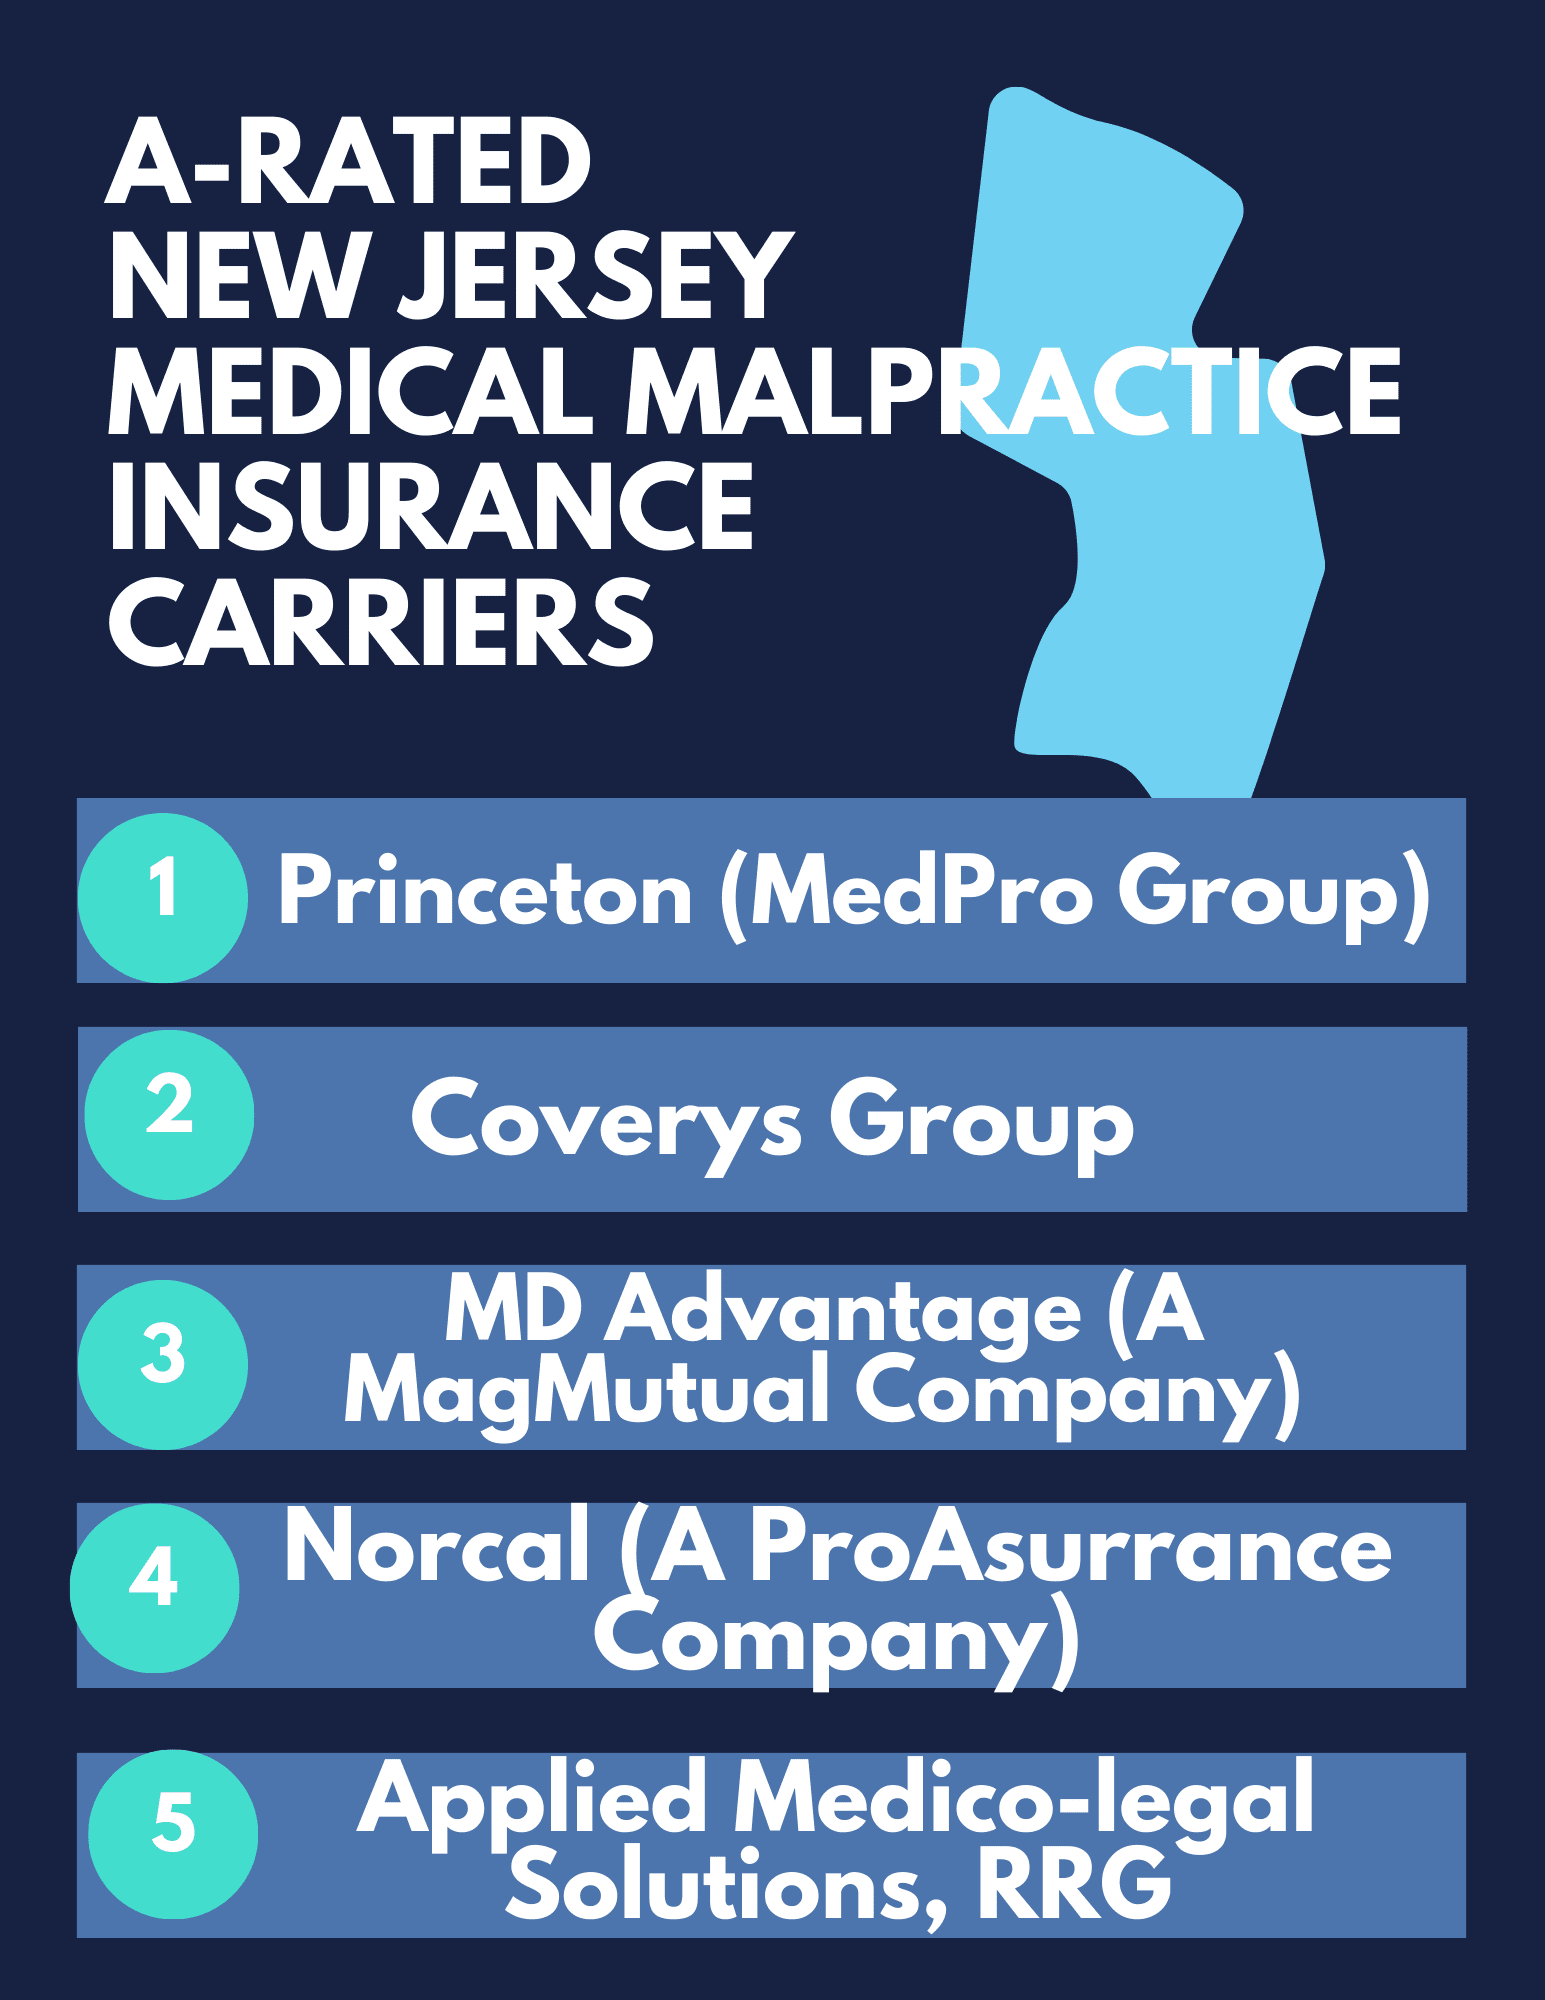 New Jersey Medical Malpractice Insurance Carriers